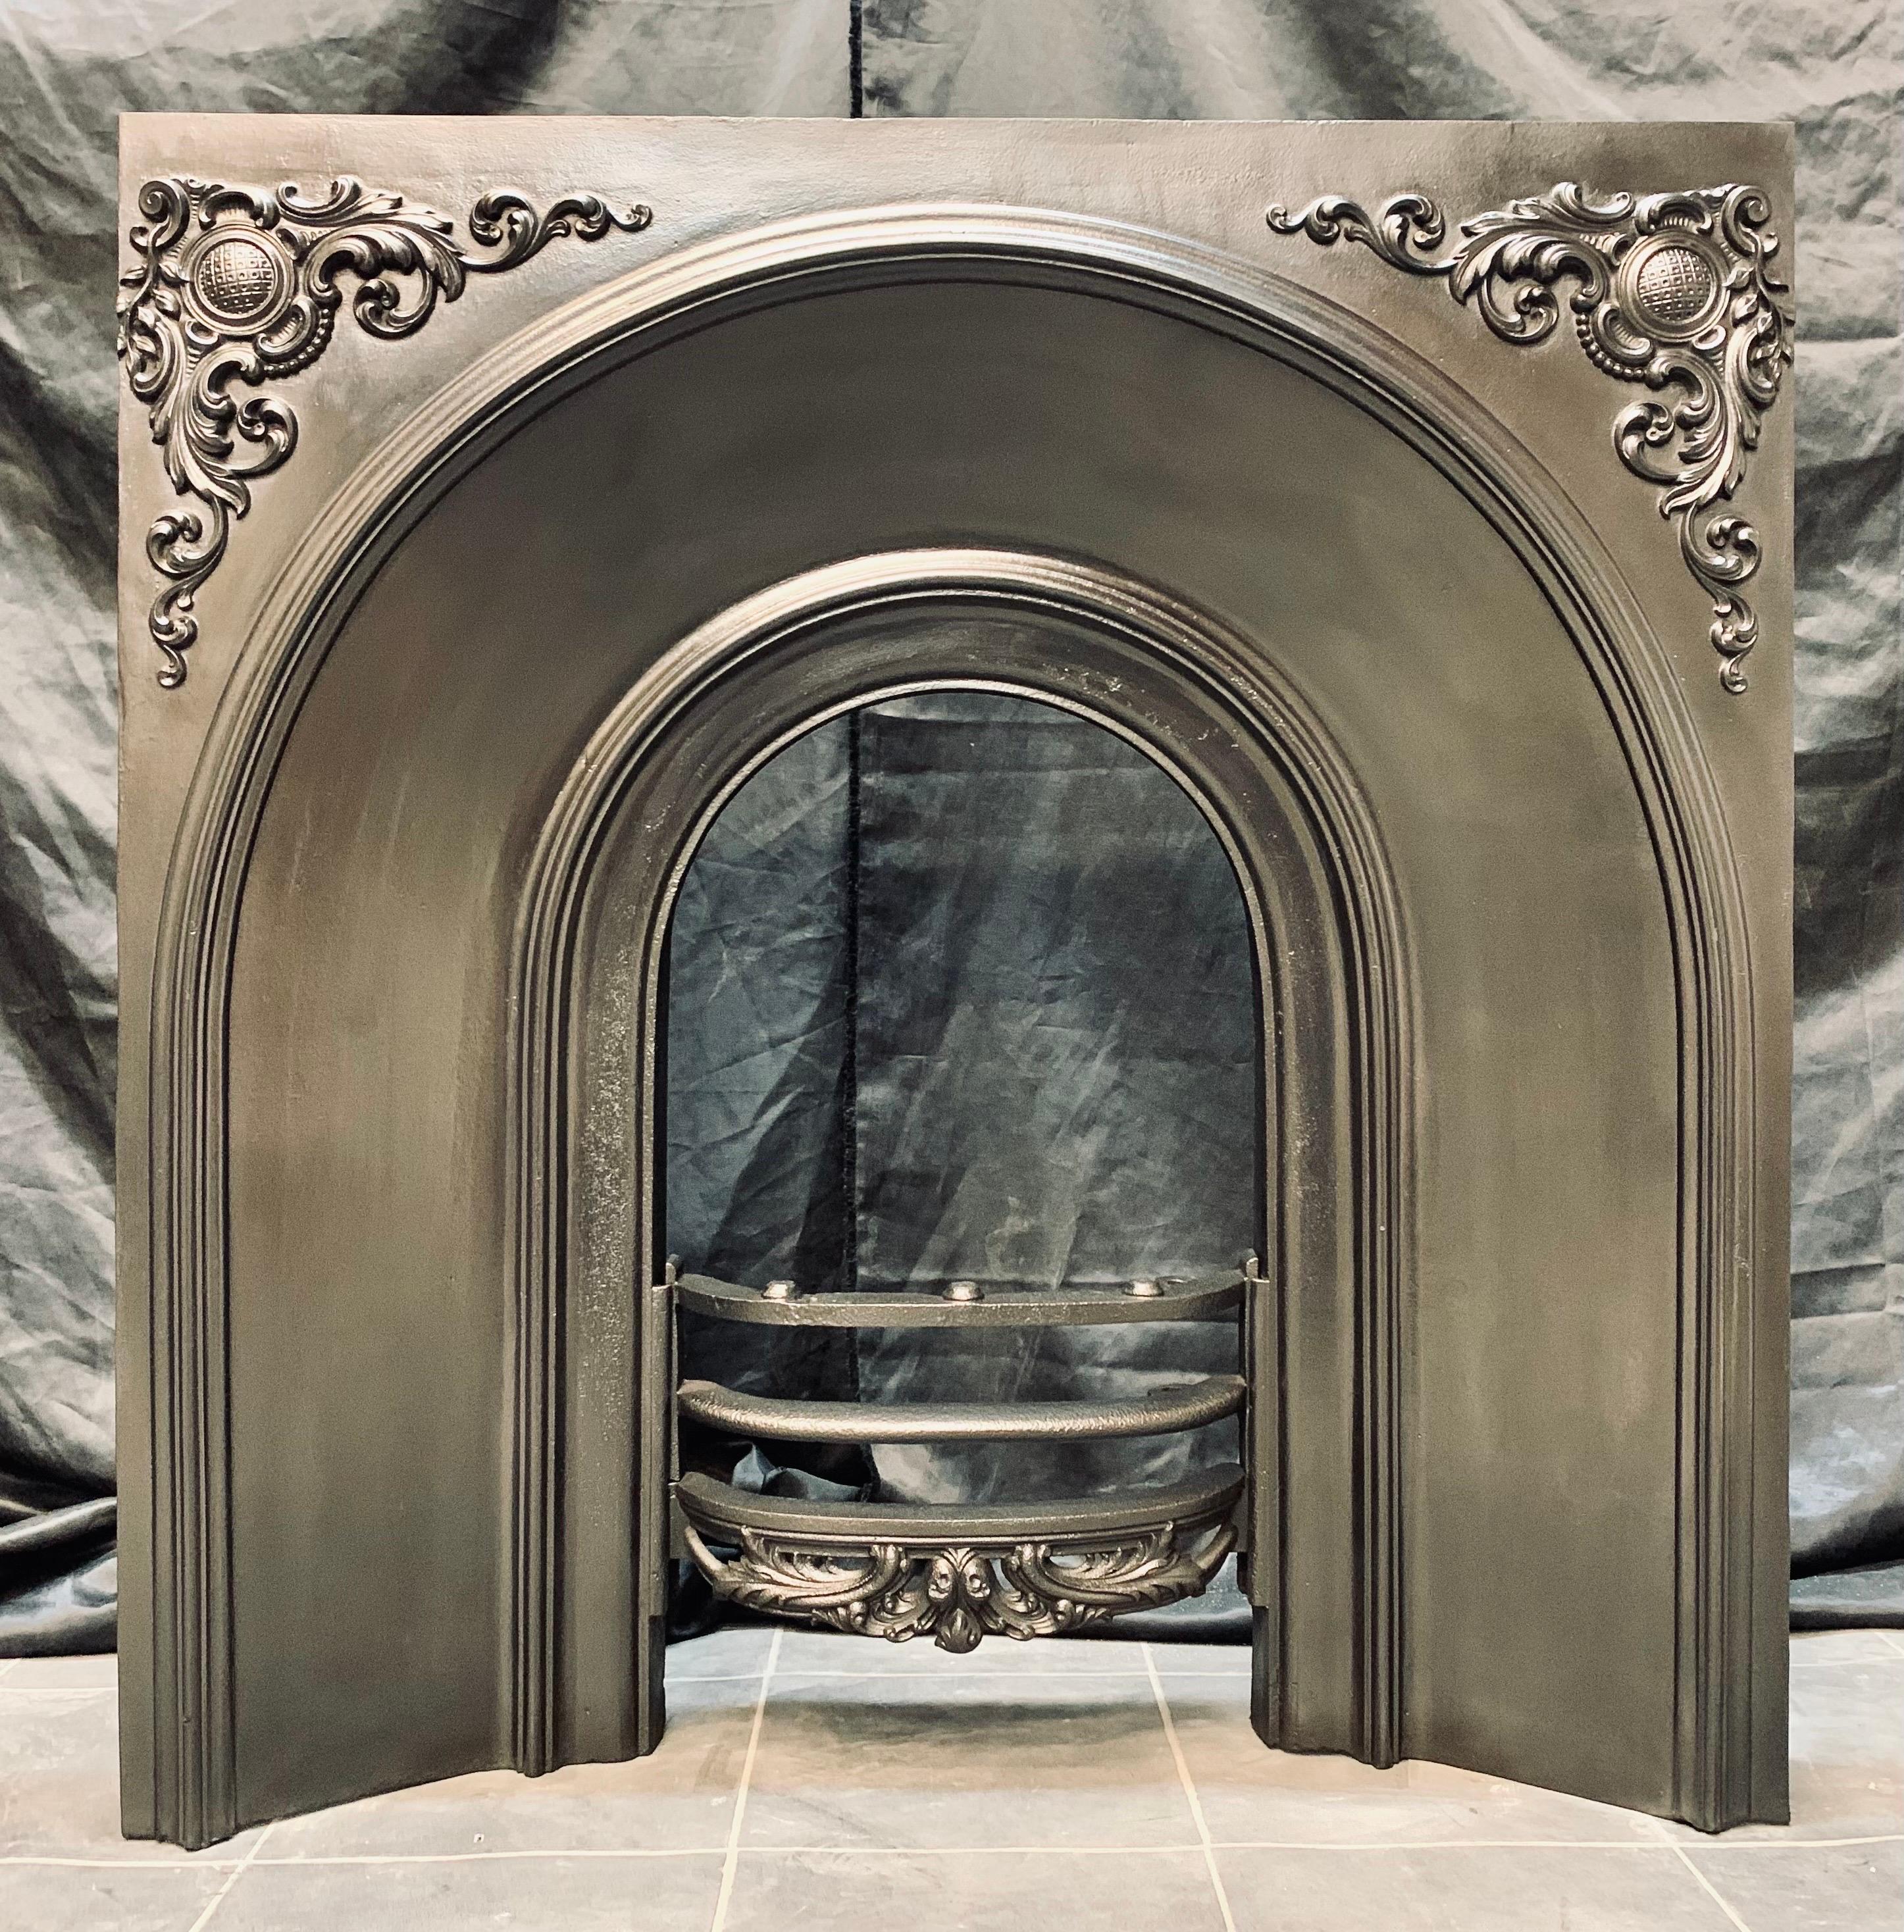 A charming mid 19th Century Victorian cast iron fireplace insert. A generous outer plate with high relief corner embellishments, a three barred shaped fire front. The casting stamp to the rear tells us this was cast in 1849. 

The internal fire